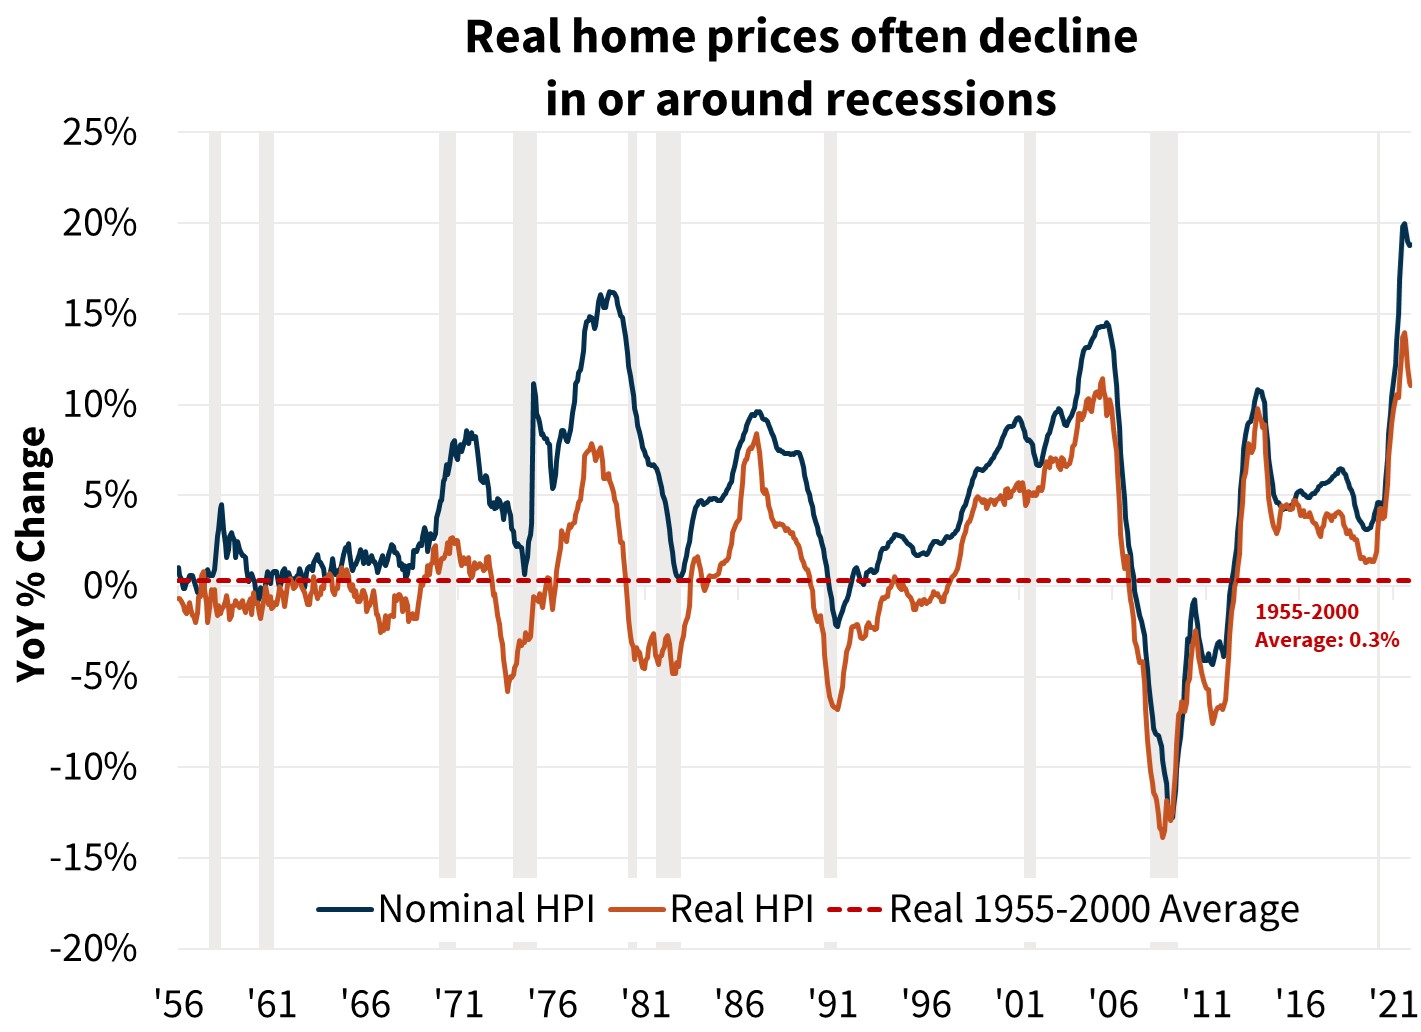  Real home prices often decline in or around recessions 